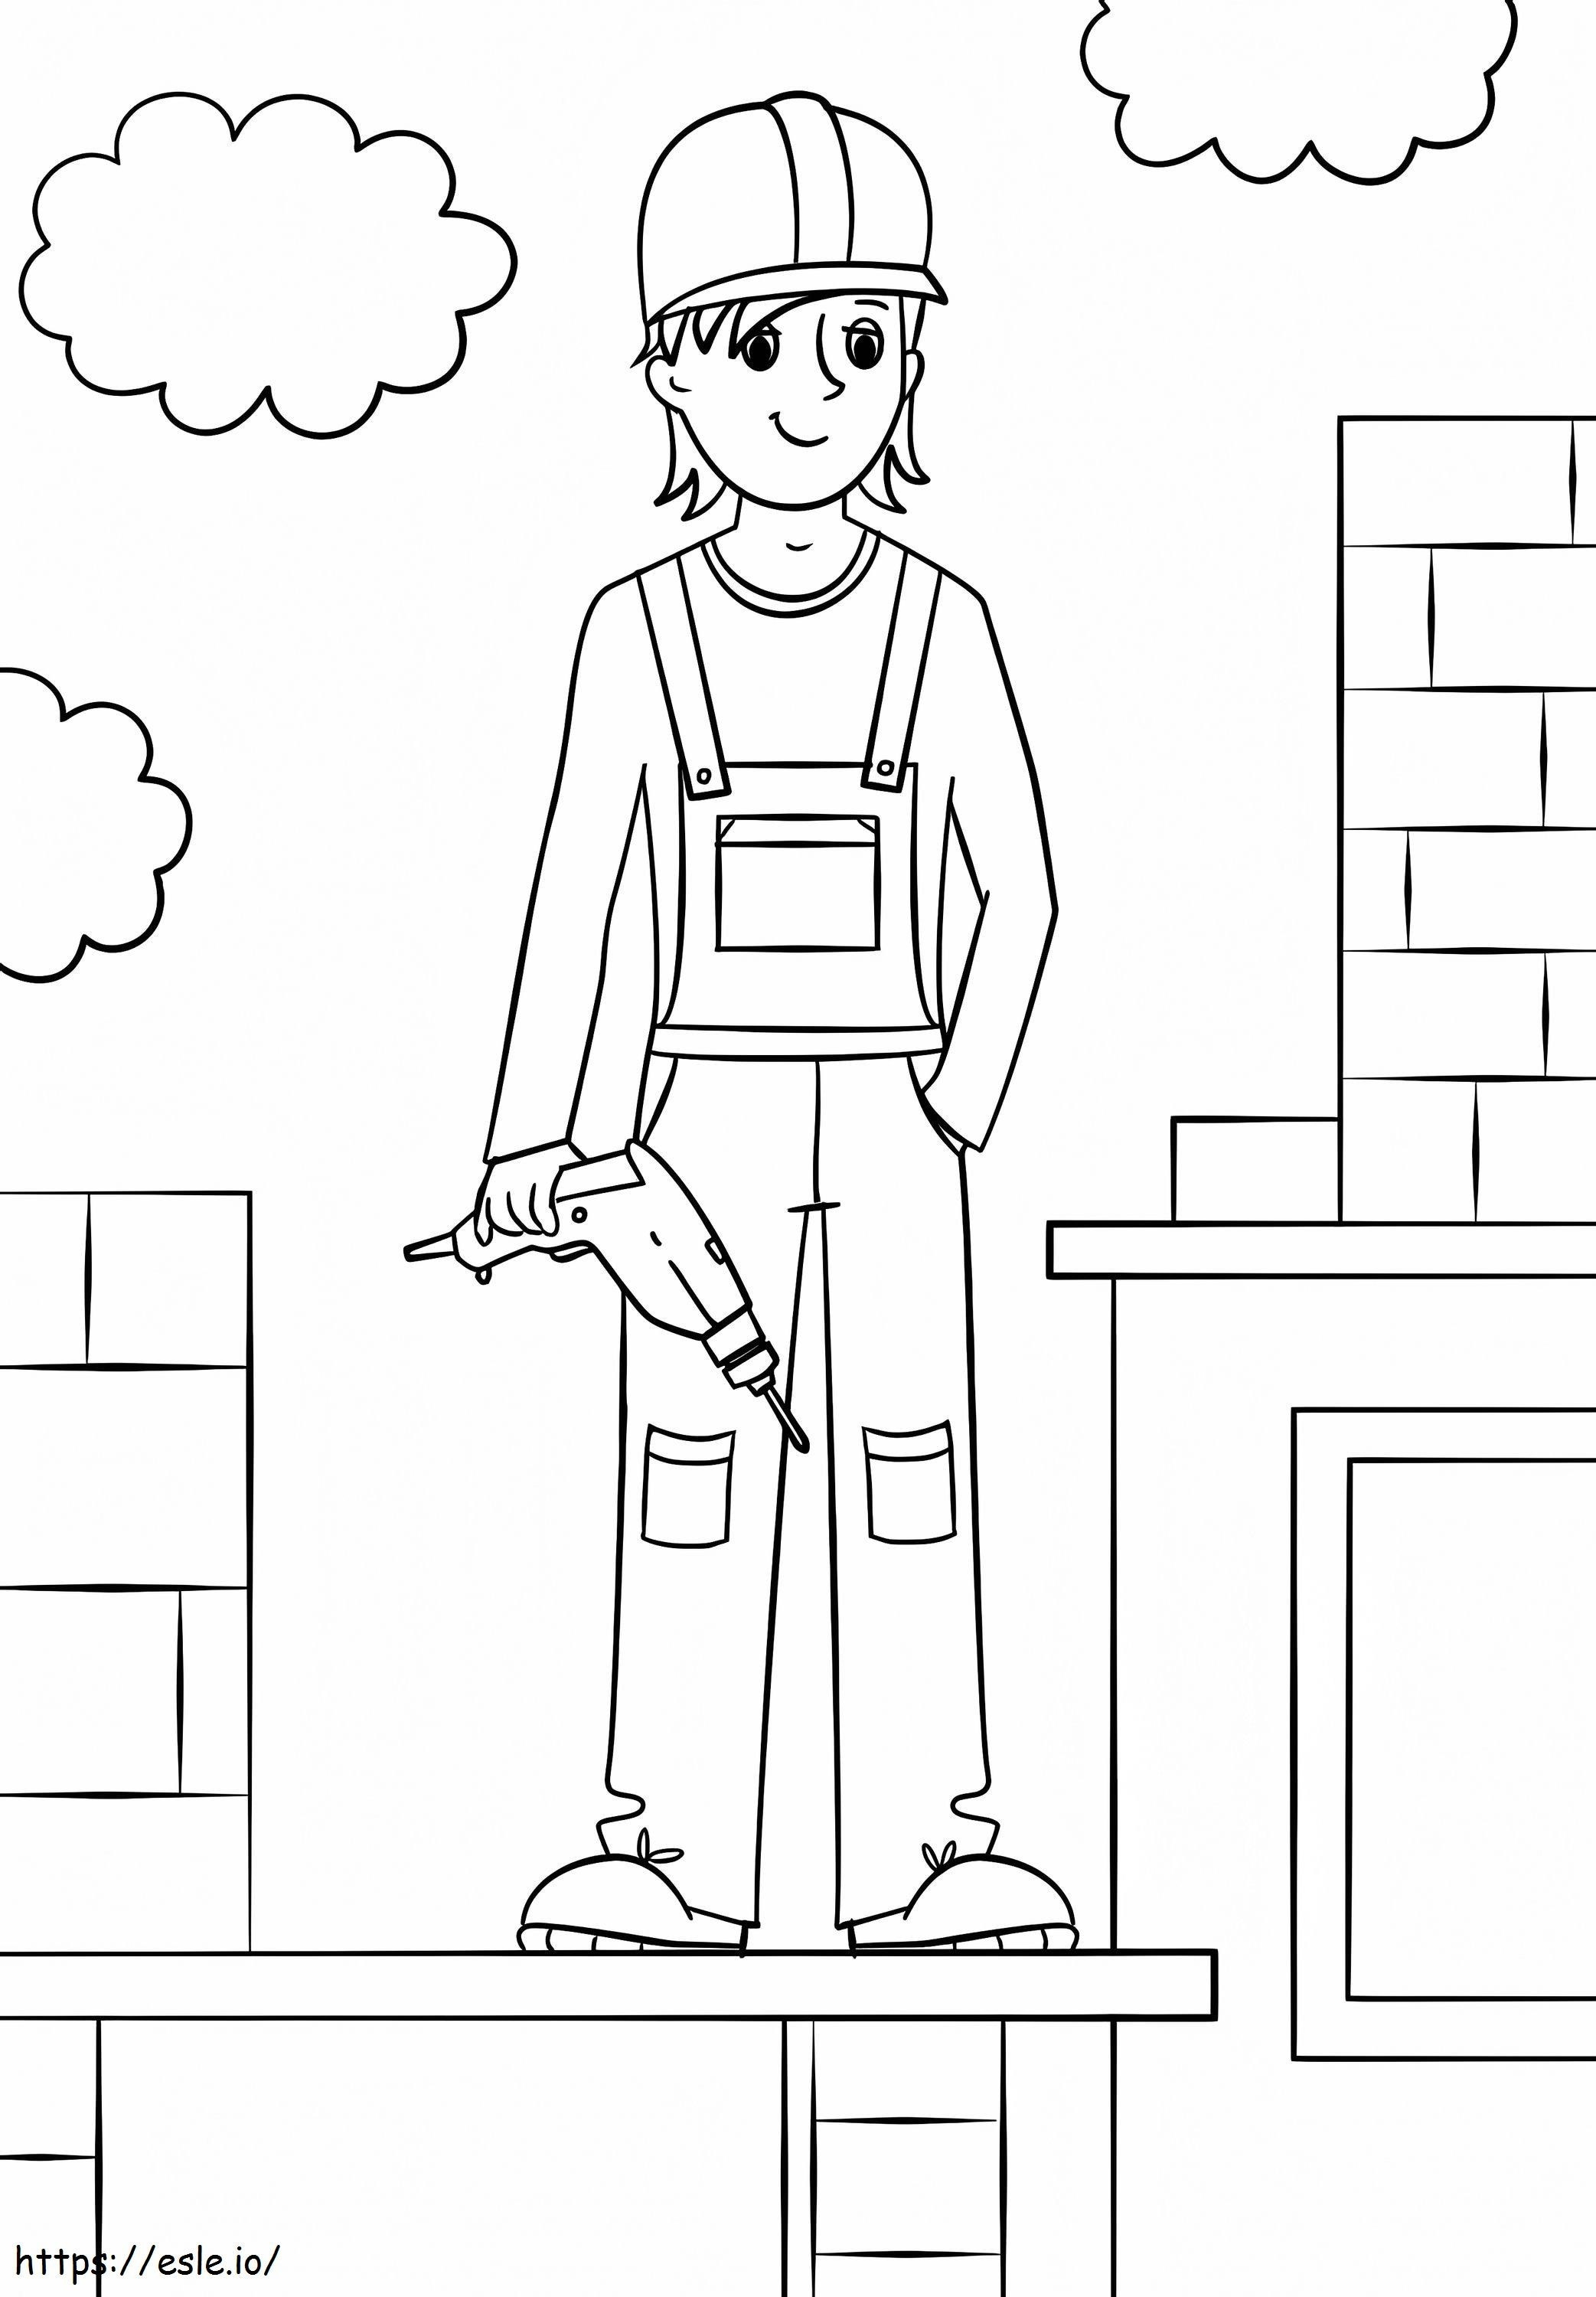 Girl Construction Worker 1 coloring page